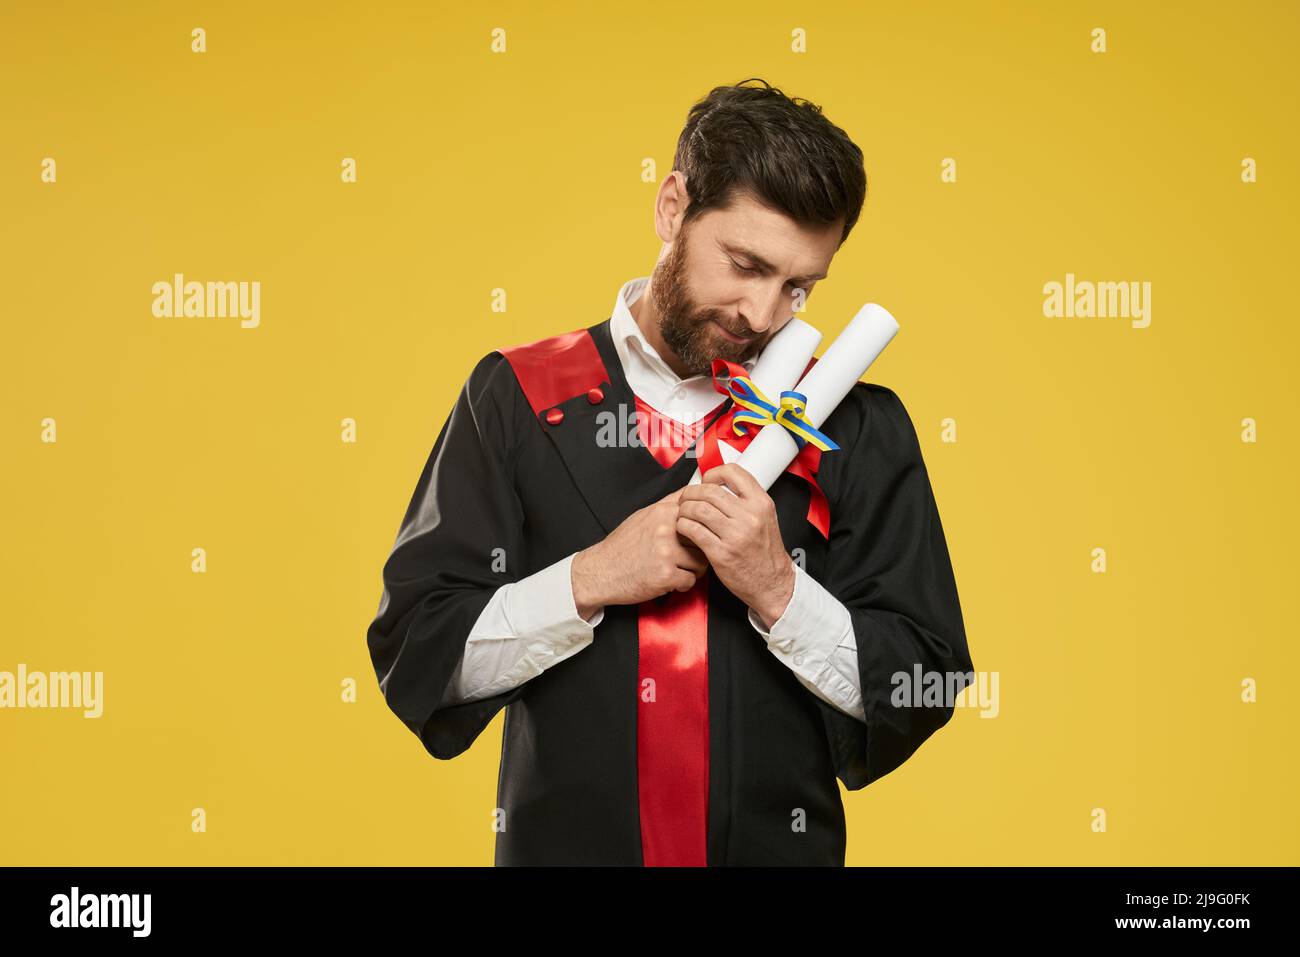 Front view of student holding, hugging two diplomas. Brunette boy with beard, wearing graduate gown, graduating from college, looking down. Isolated on yellow studio background. Stock Photo